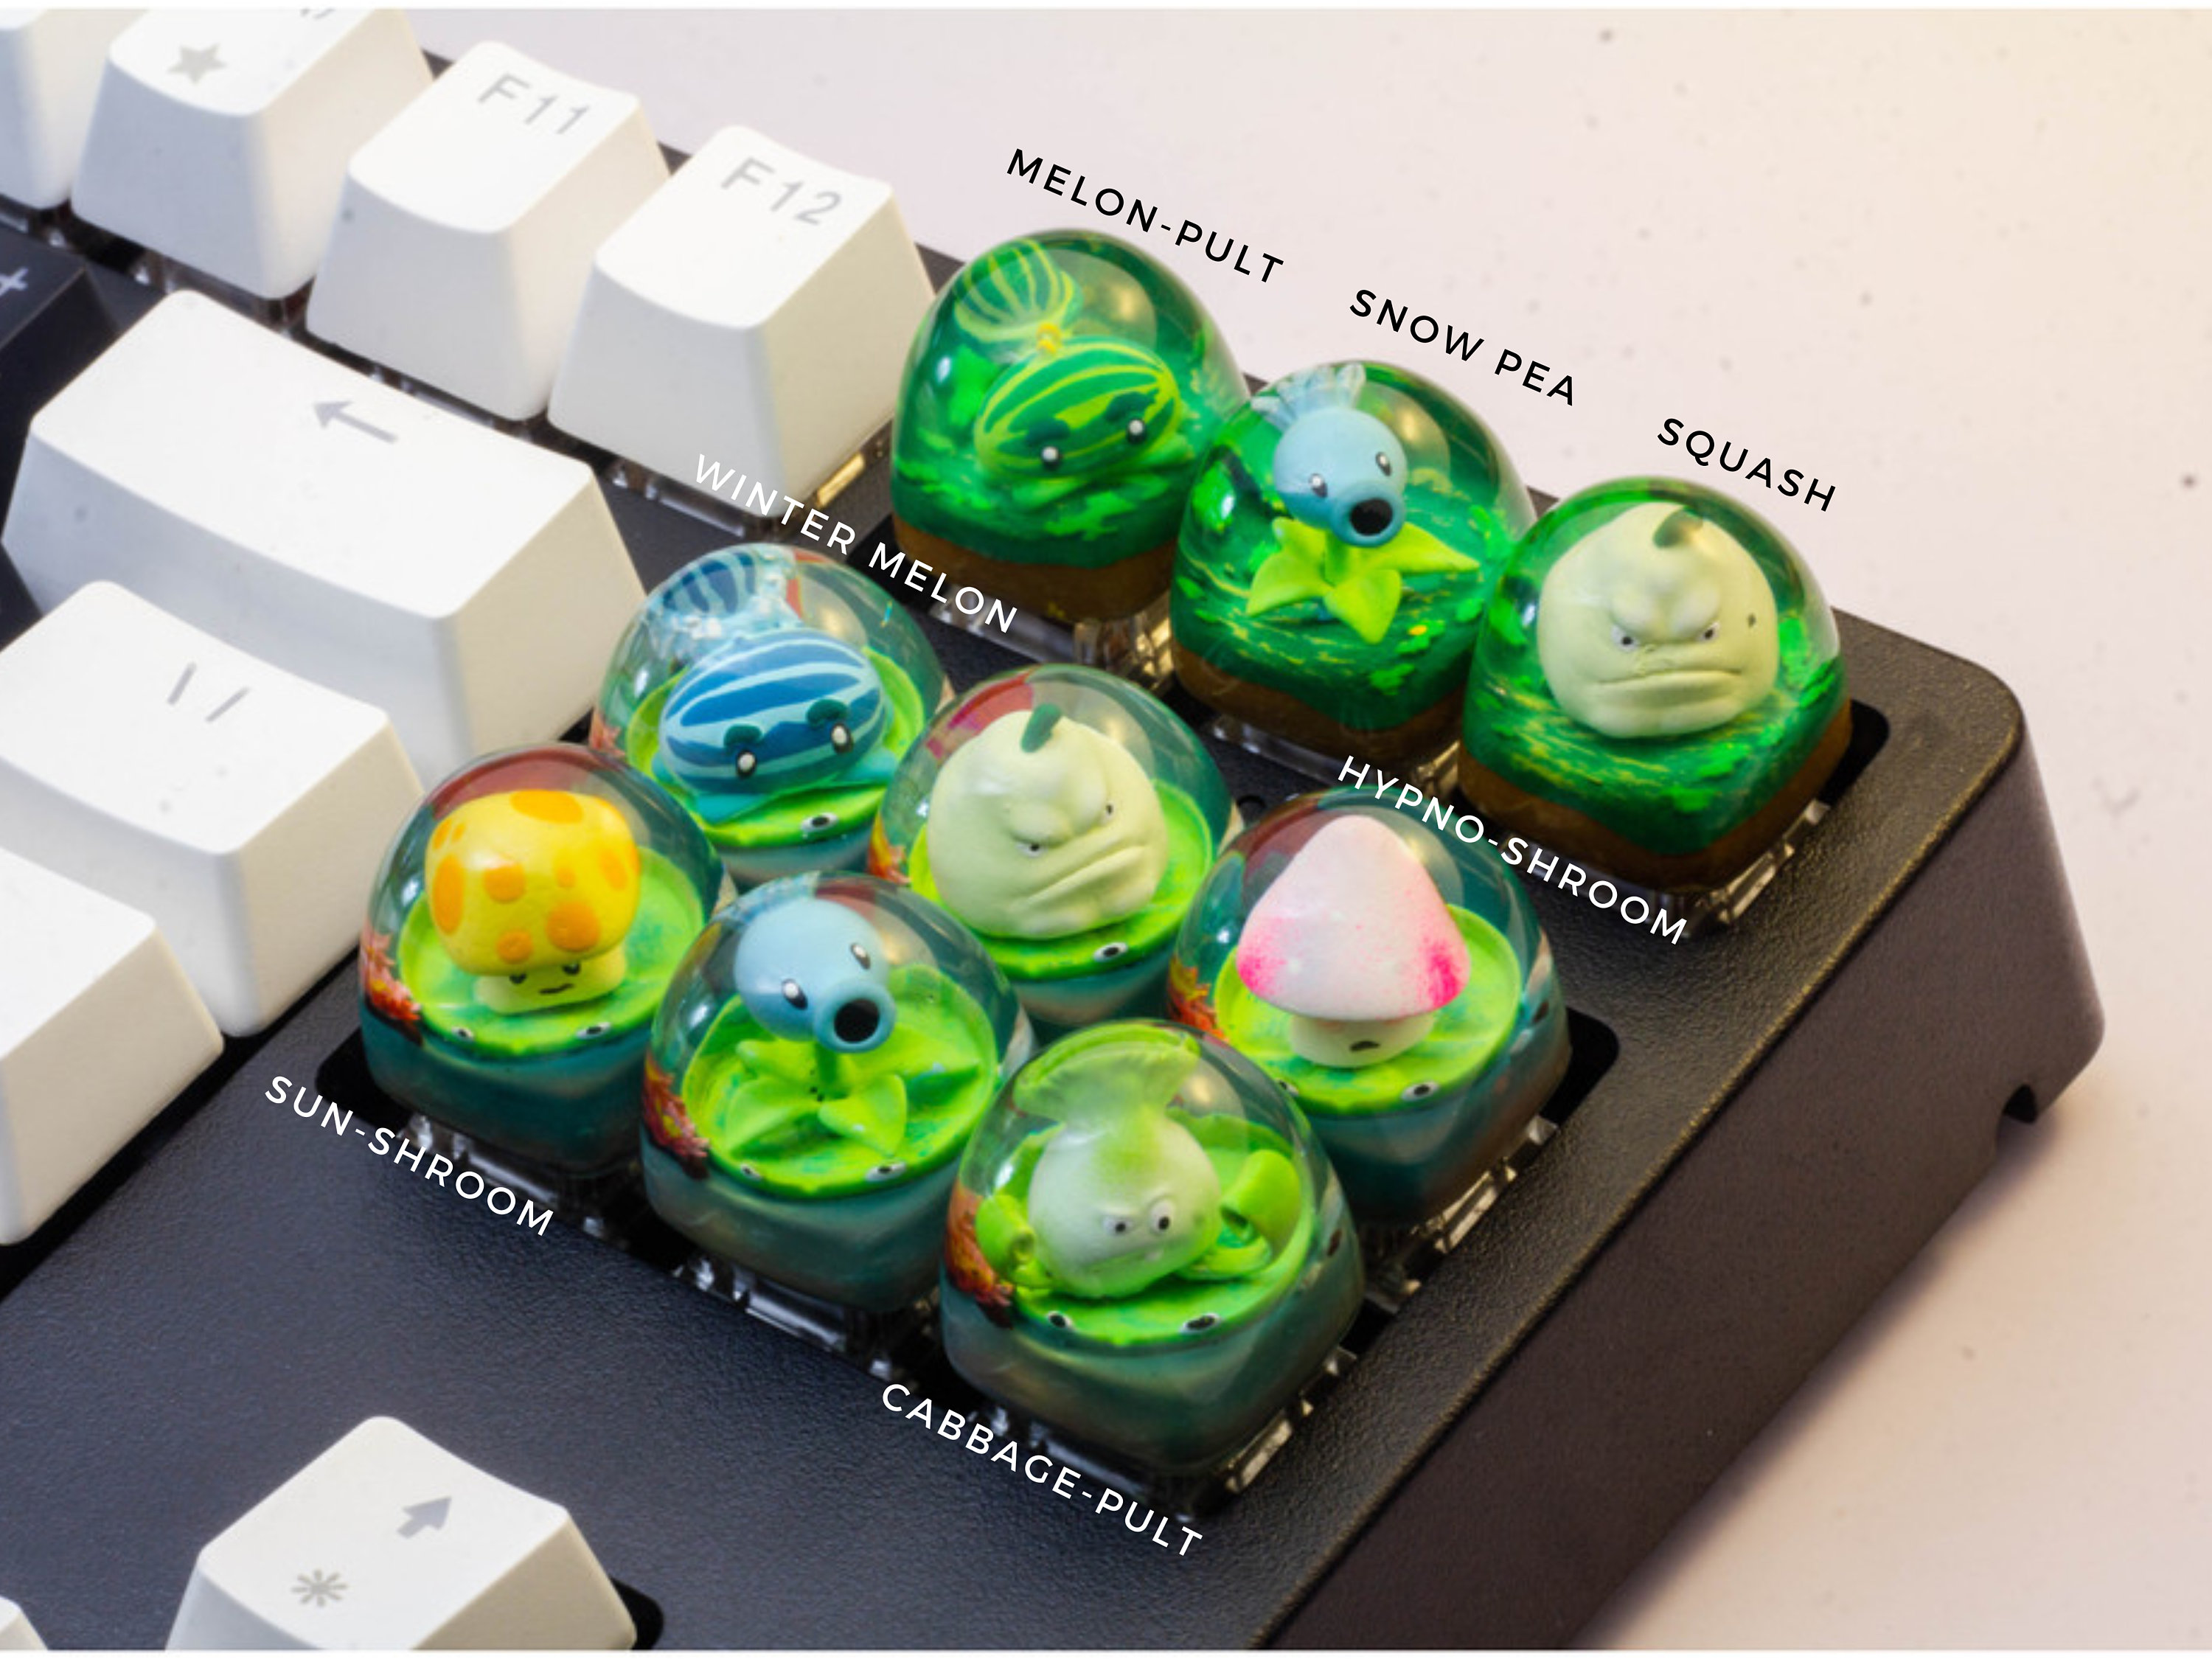 Plants vs. Zombies Keycap, Gaming Keycap, Artisan Keycap, Keycap for MX Cherry Switches Mechanical Keyboard, Gift for Him